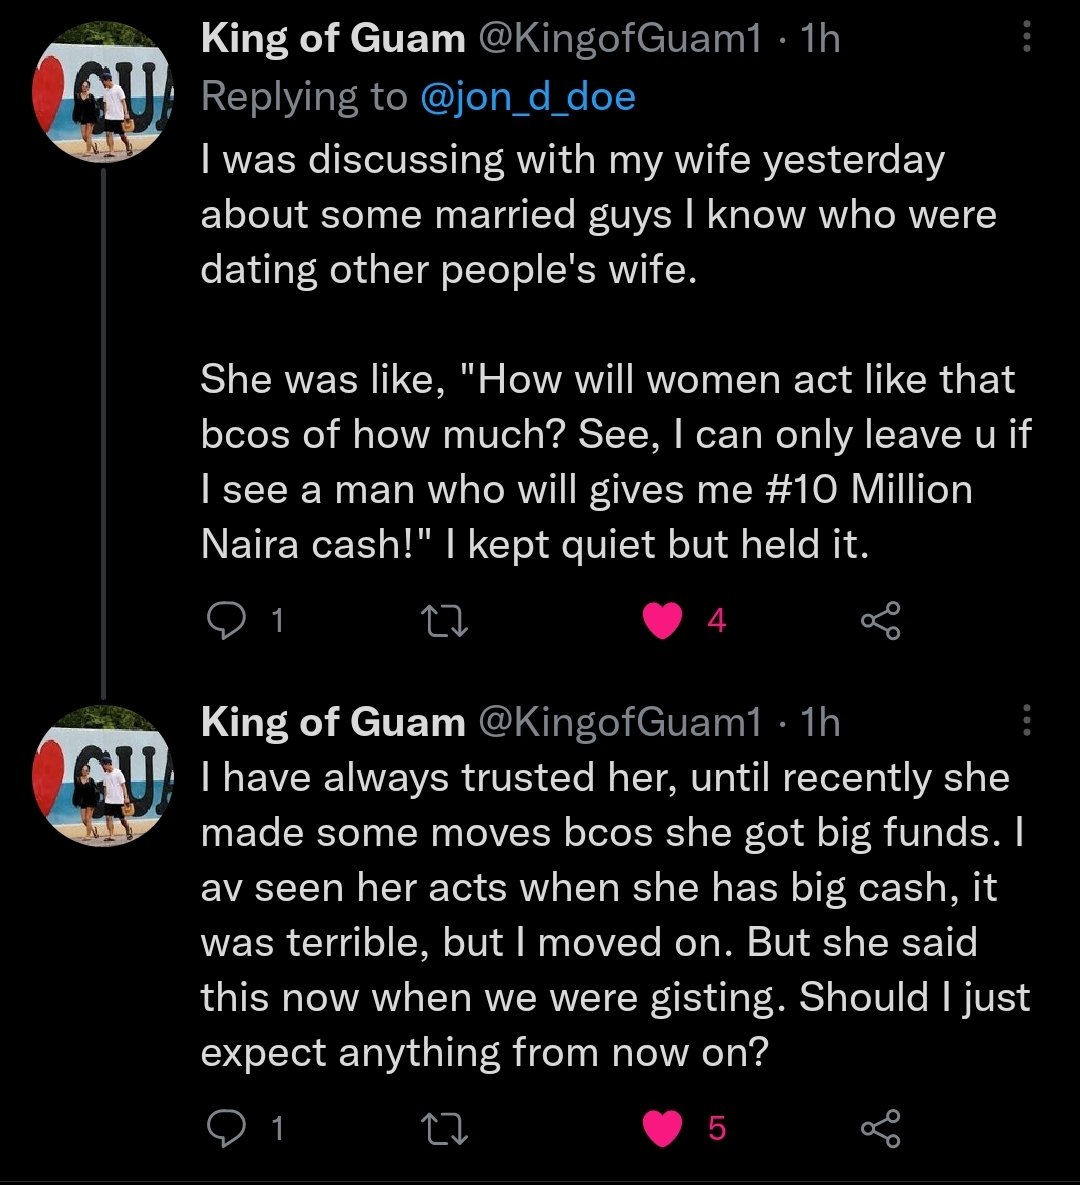 Man heartbroken as wife gives condition of leaving him for N10M